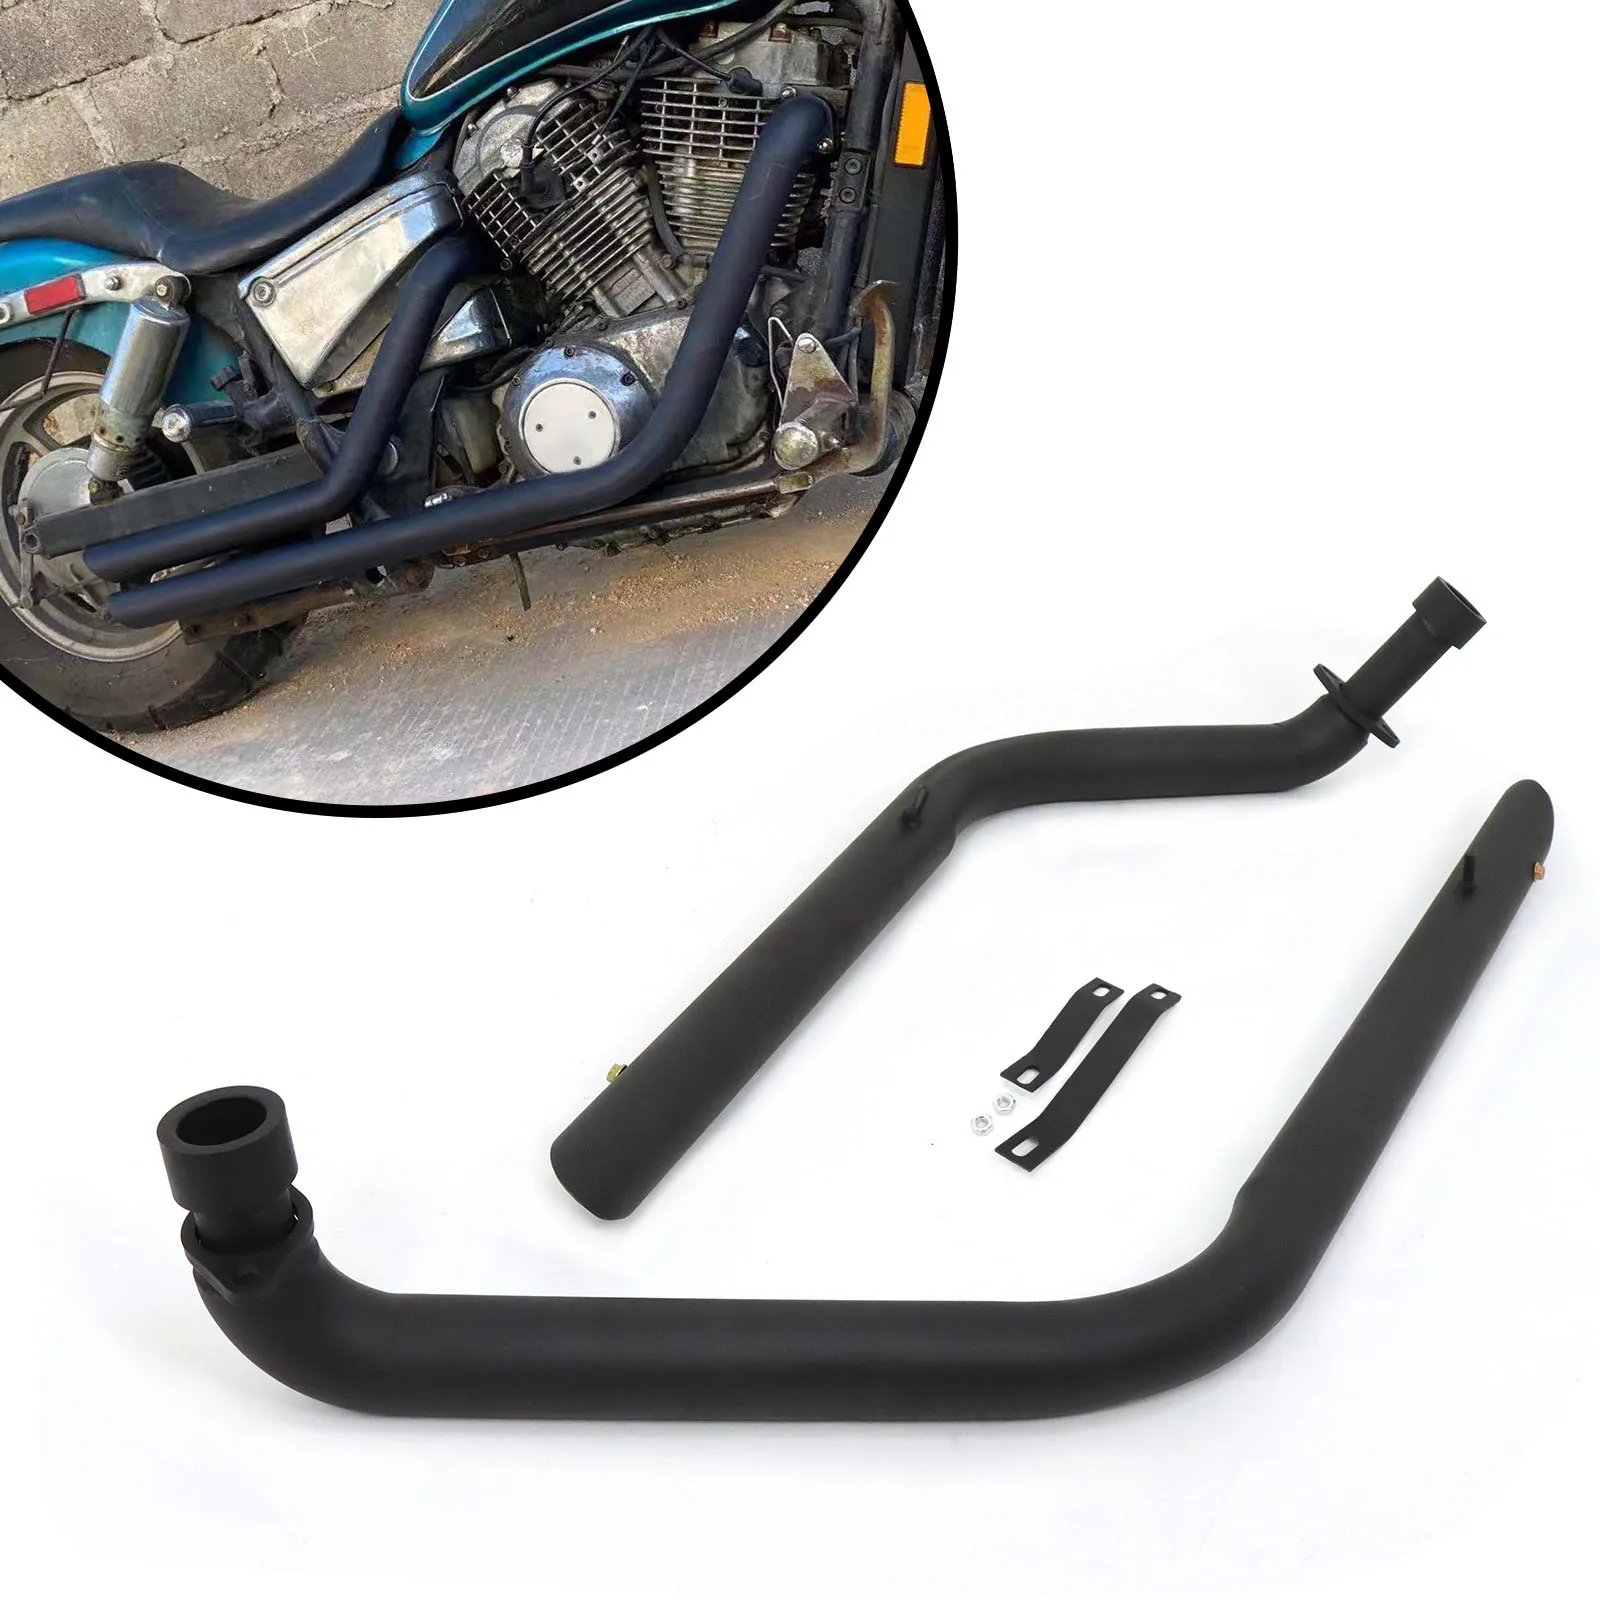 black, A Worldmotop Stainless Steel Muffler Exhaust Pipe for Honda VT1100 SHADOW ACE 1100 SHADOW Aero 1100 SHADOW Spirit 1100 SHADOW Sabre 1100 All Years 